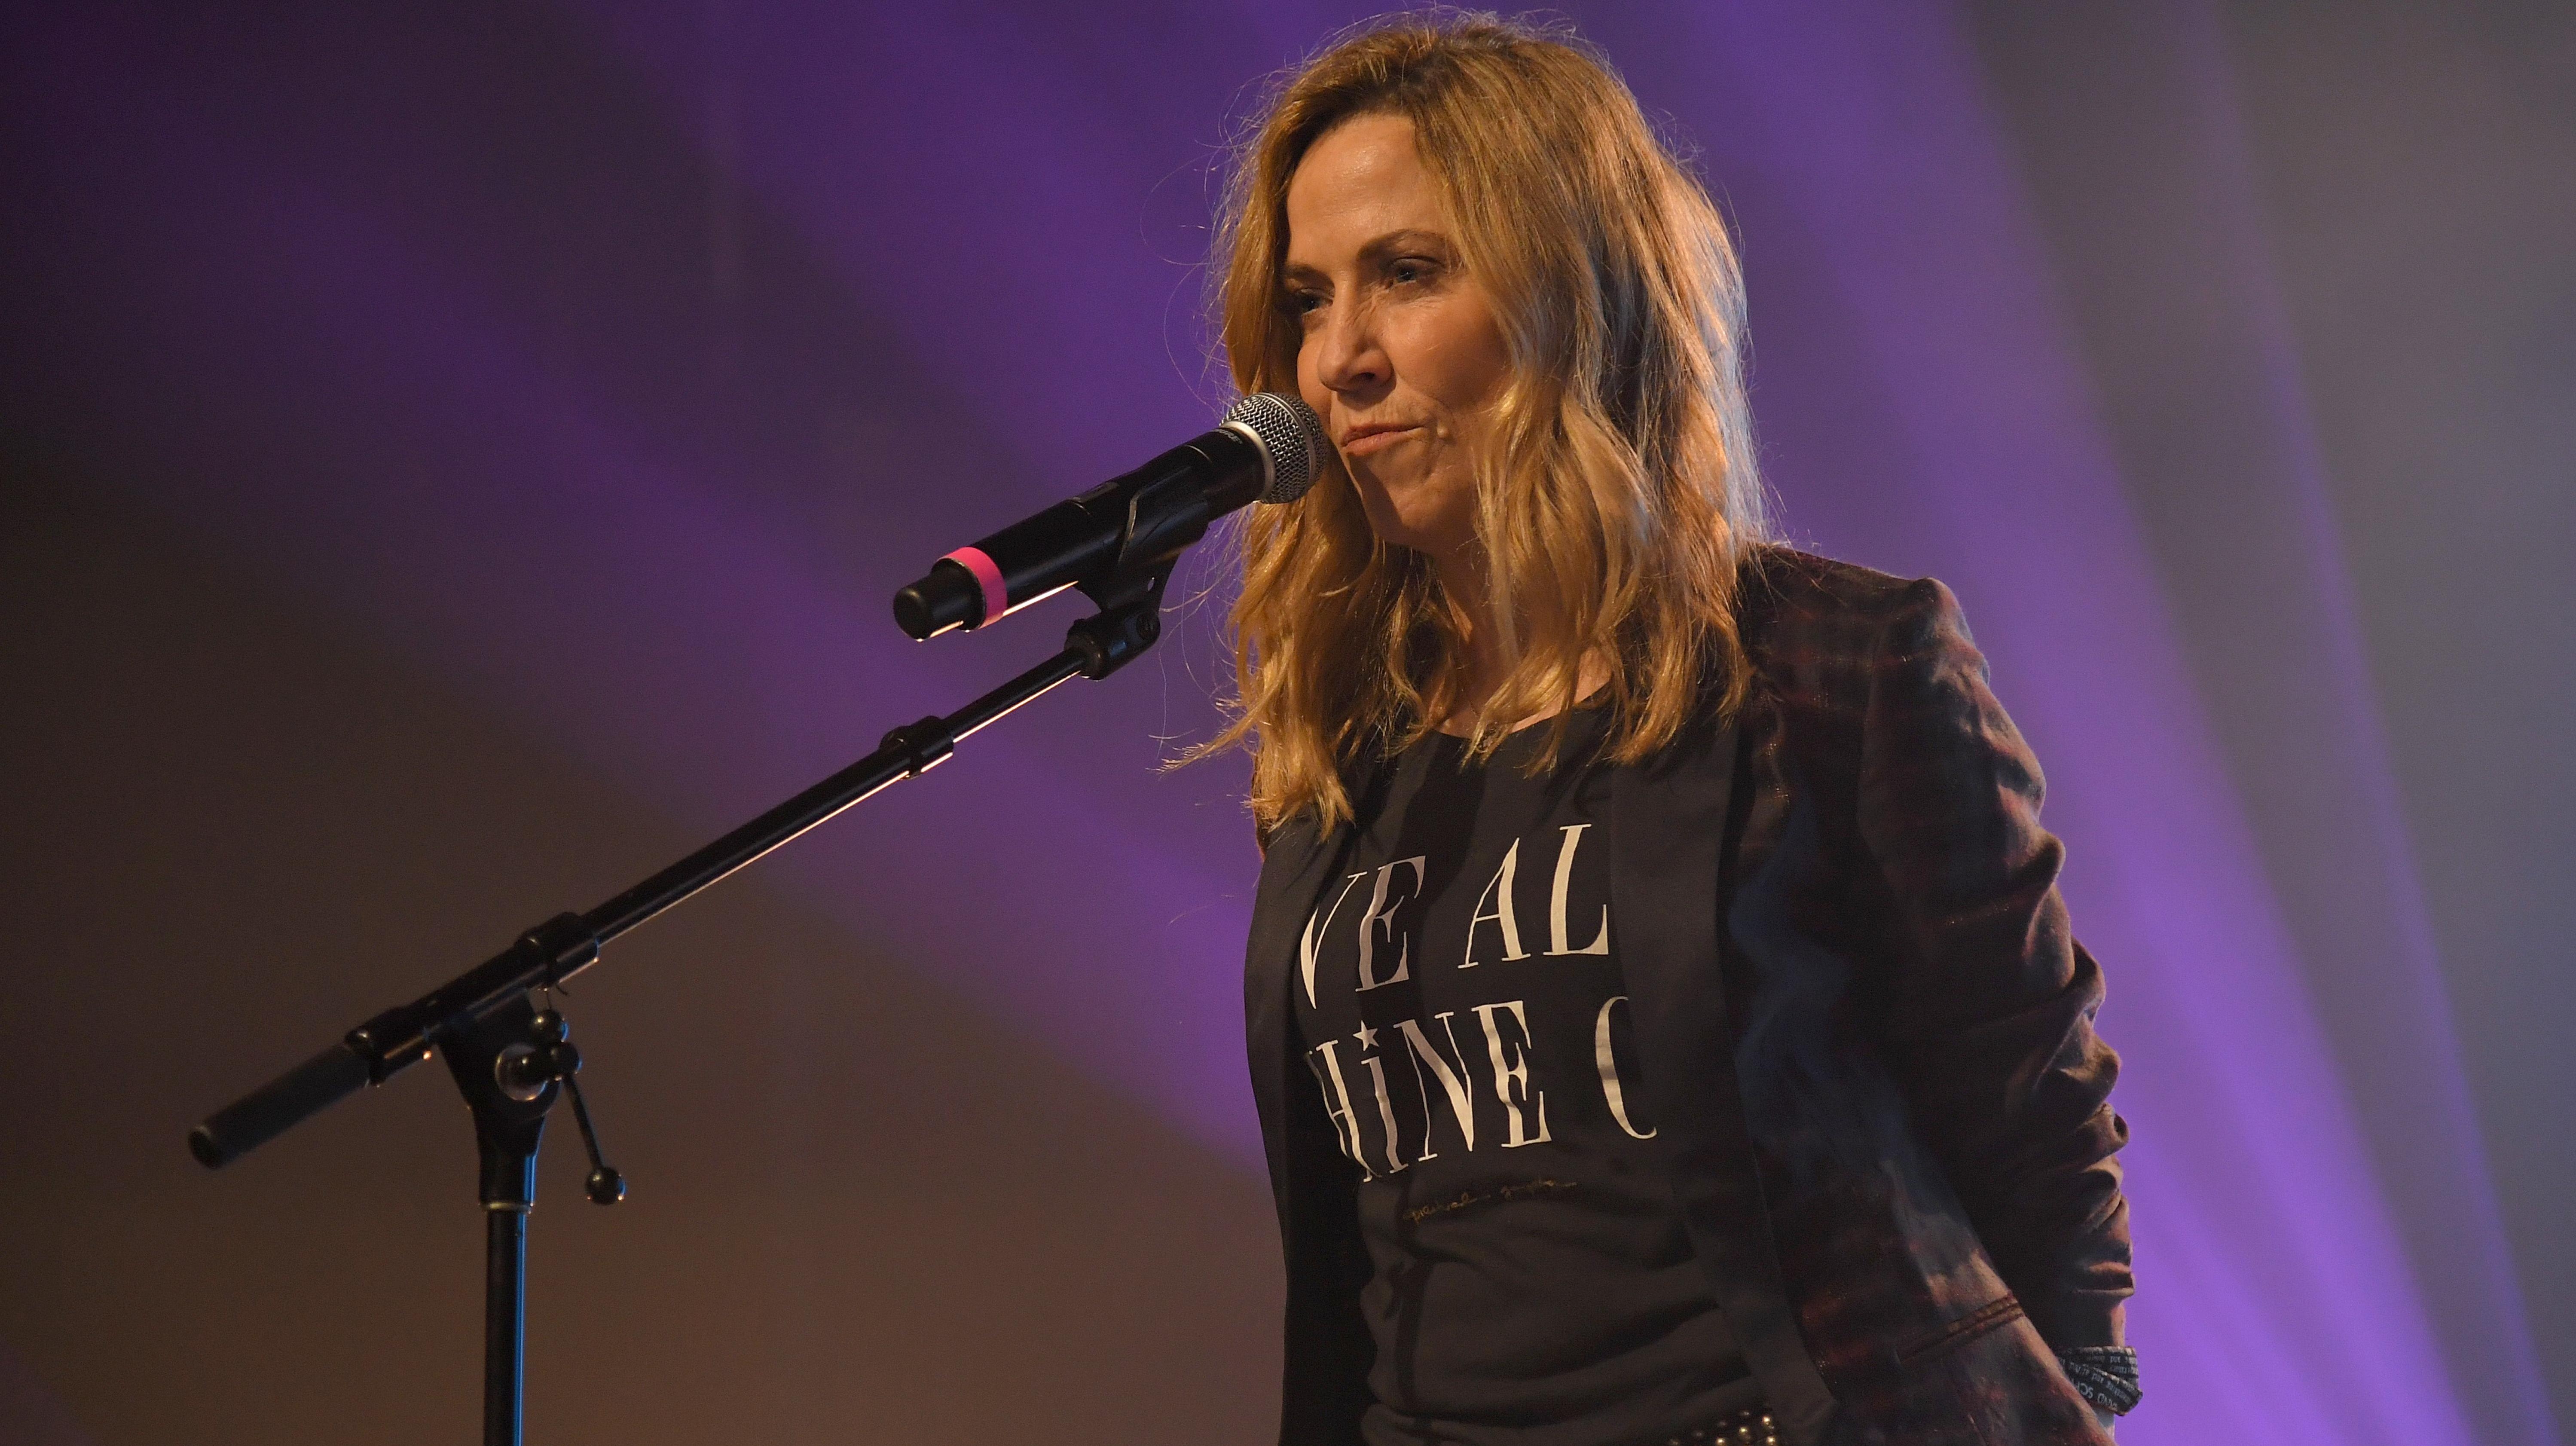 Sheryl Crow says Michael Jackson's manager sexually harassed her